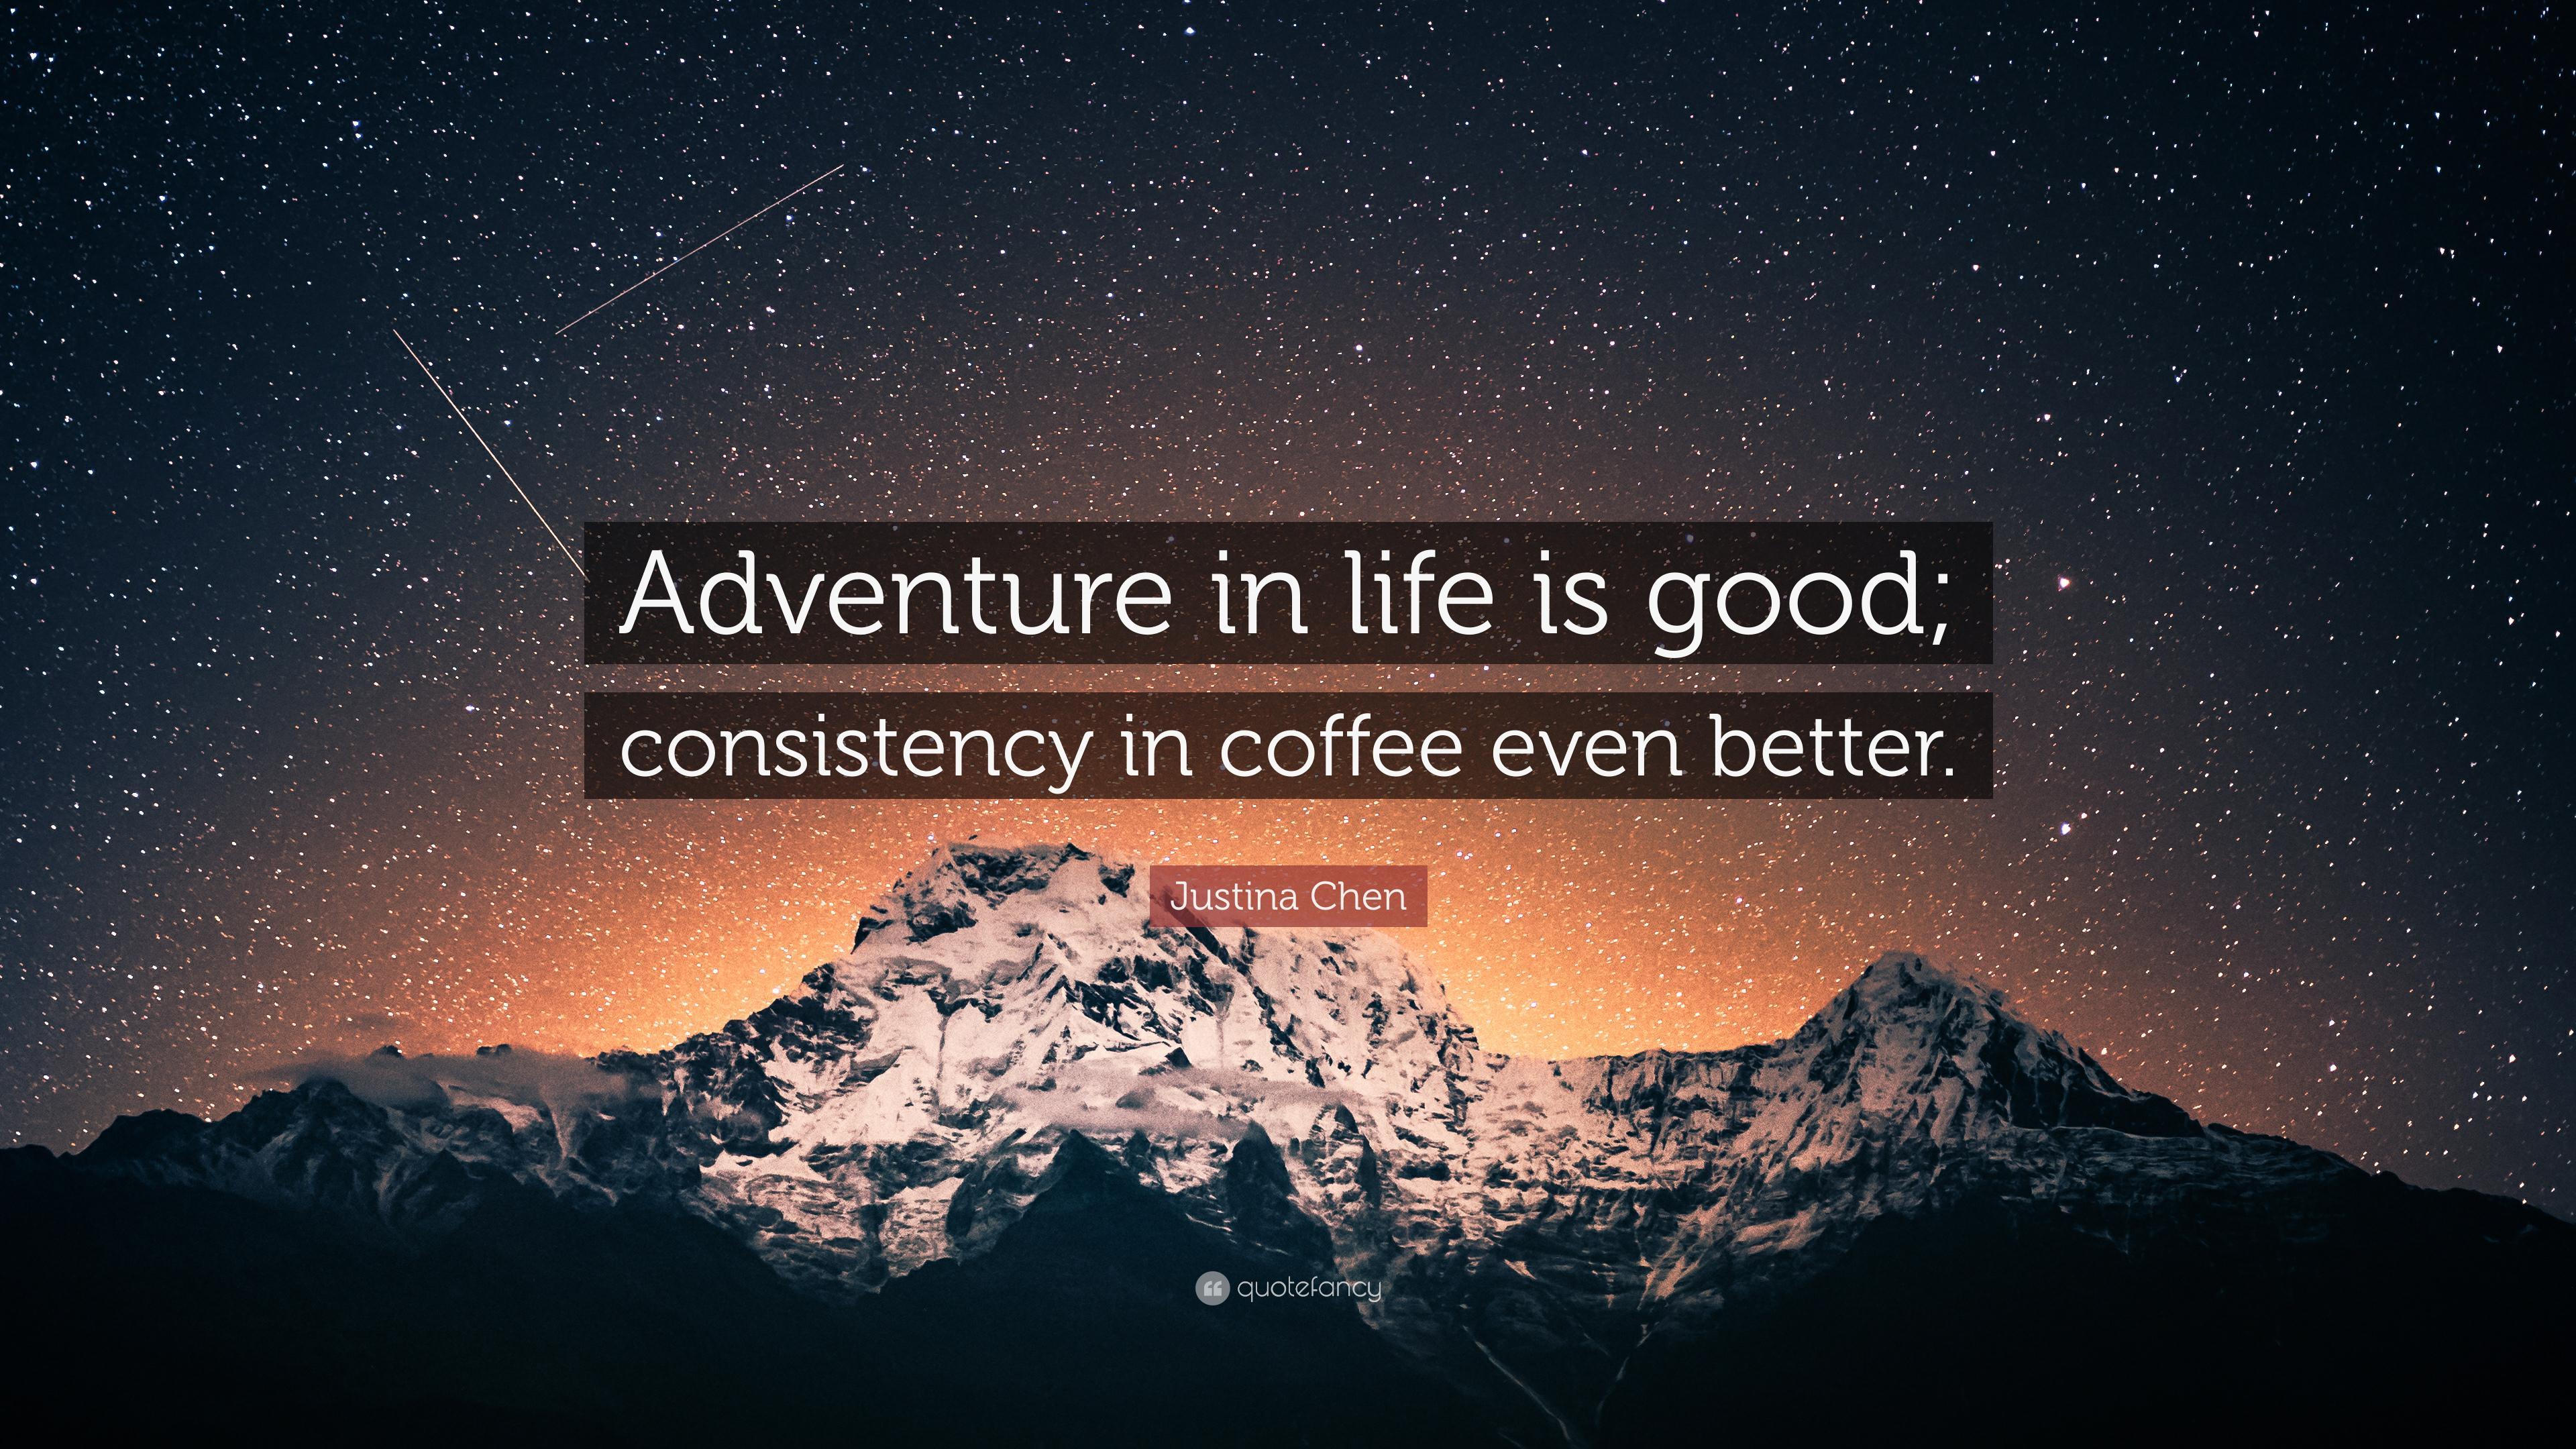 Justina Chen Quote: “Adventure in life is good; consistency